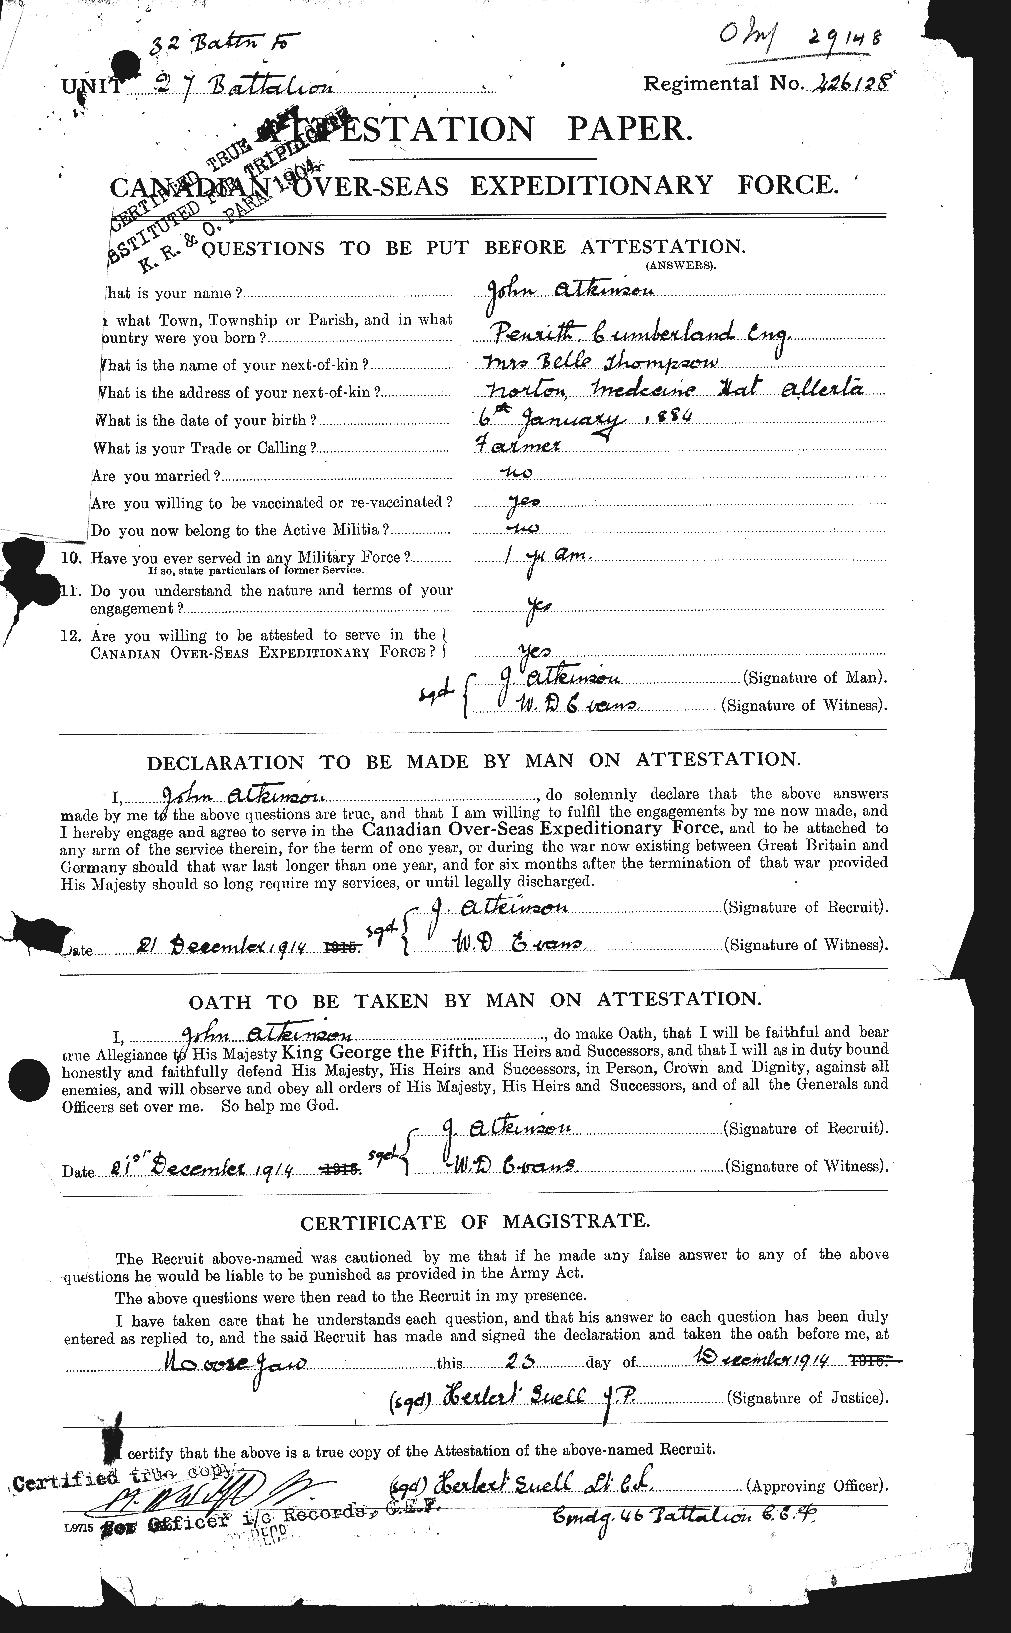 Personnel Records of the First World War - CEF 217333a